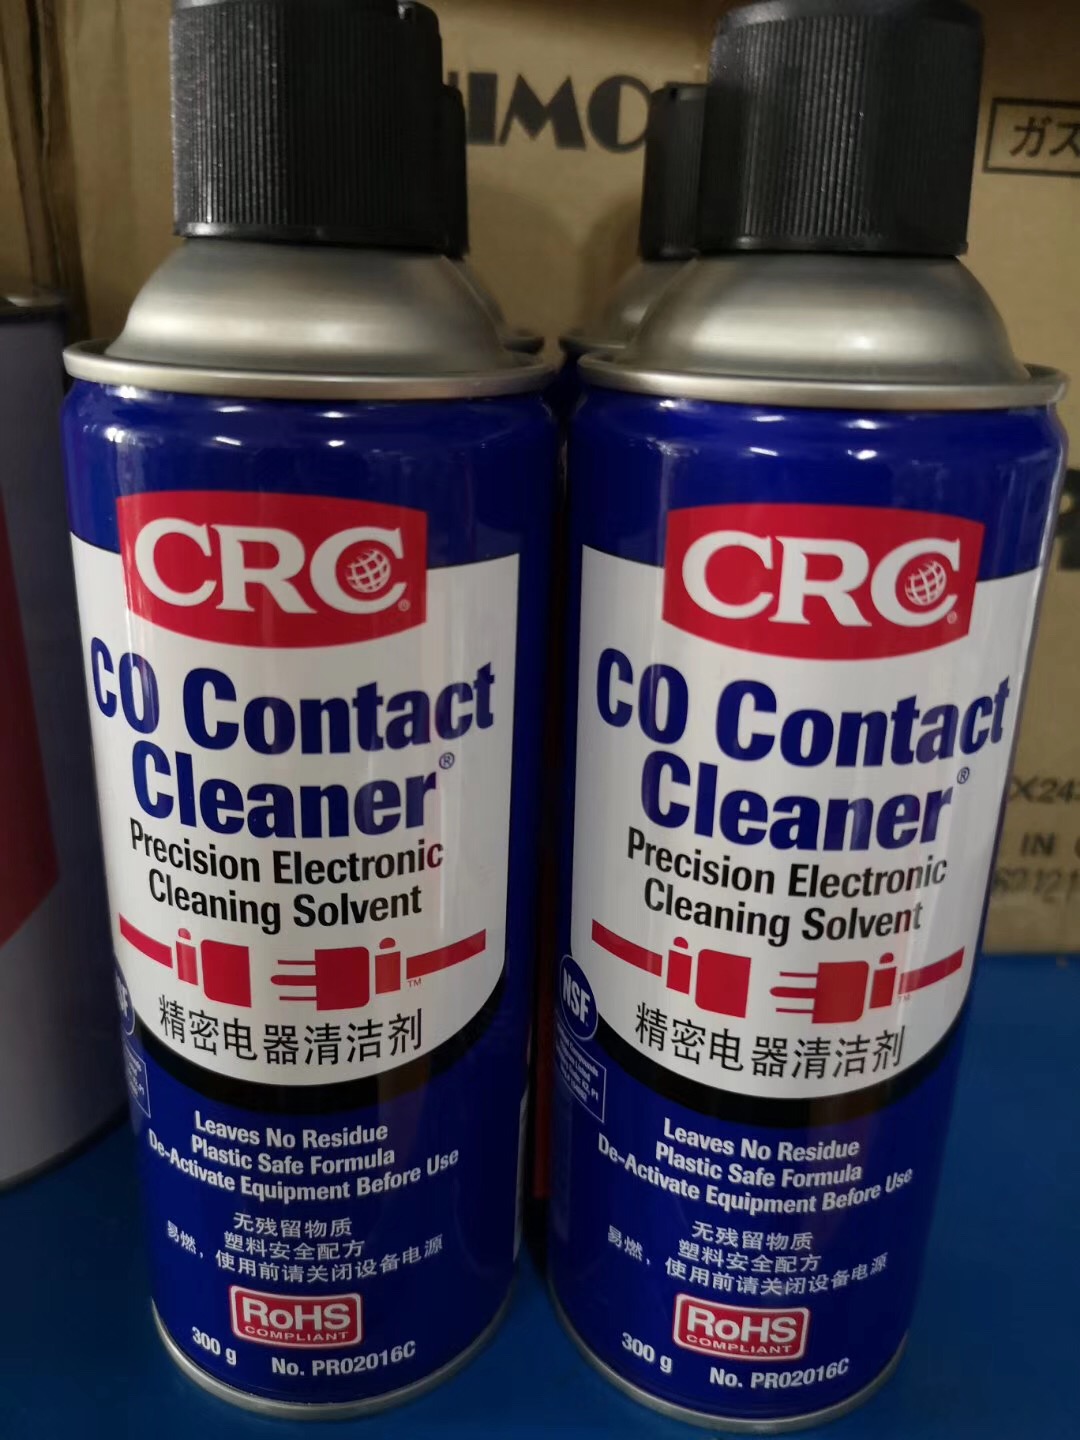 CO contact cleaner